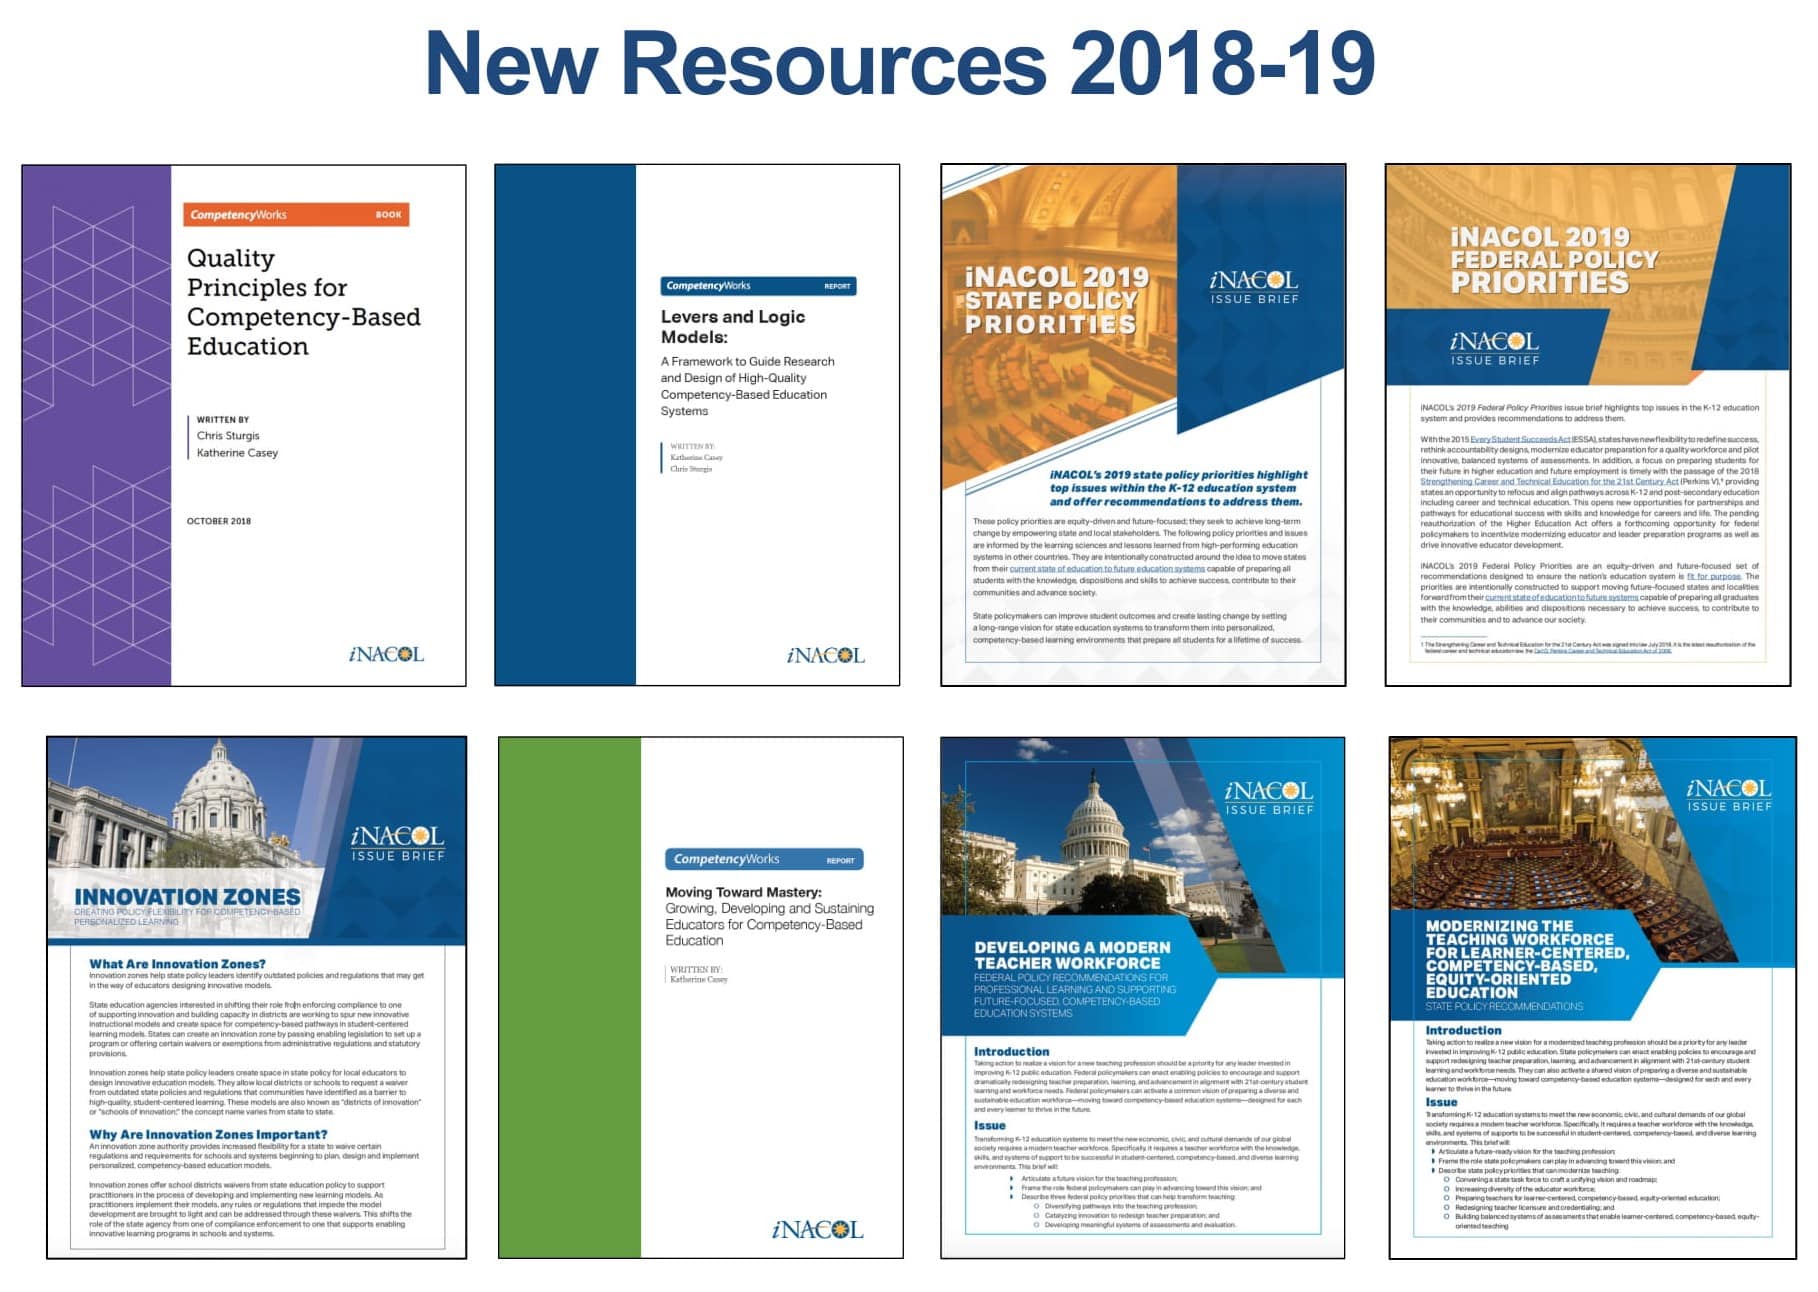 New Resources 2018-19, 1 of 3